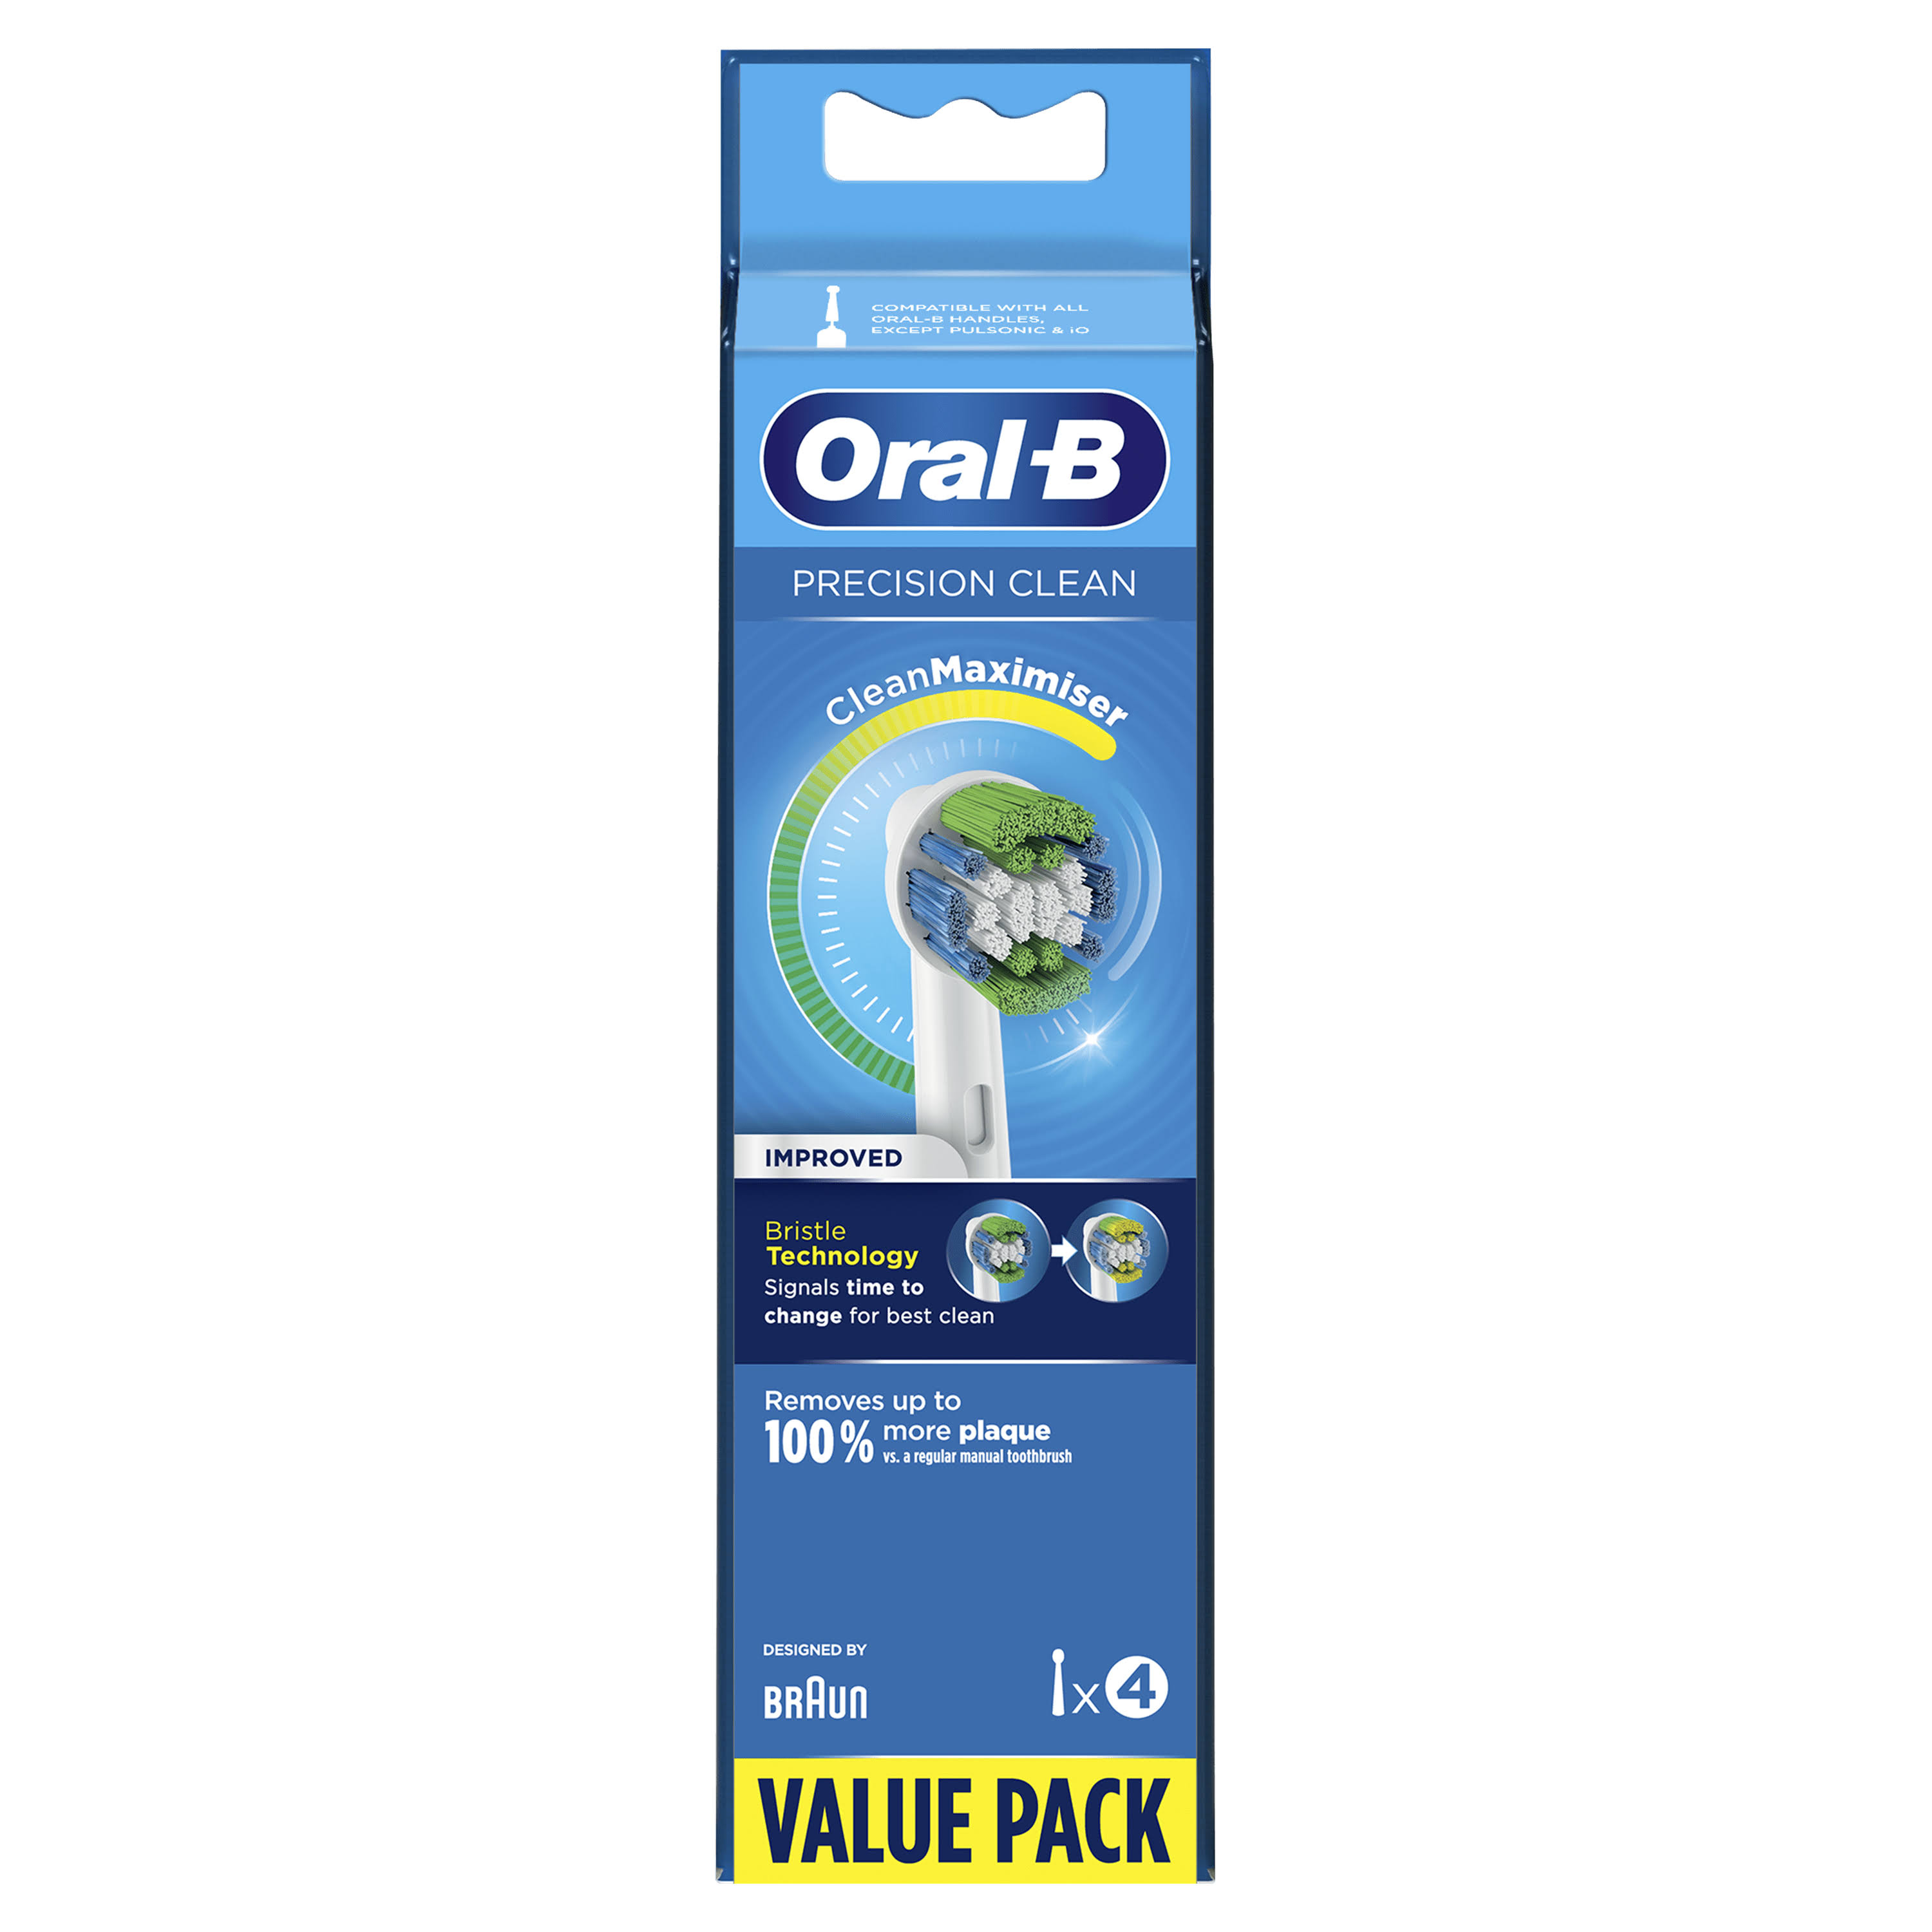 Oral-B Precision Clean Electric Toothbrush Heads - 4 Pack